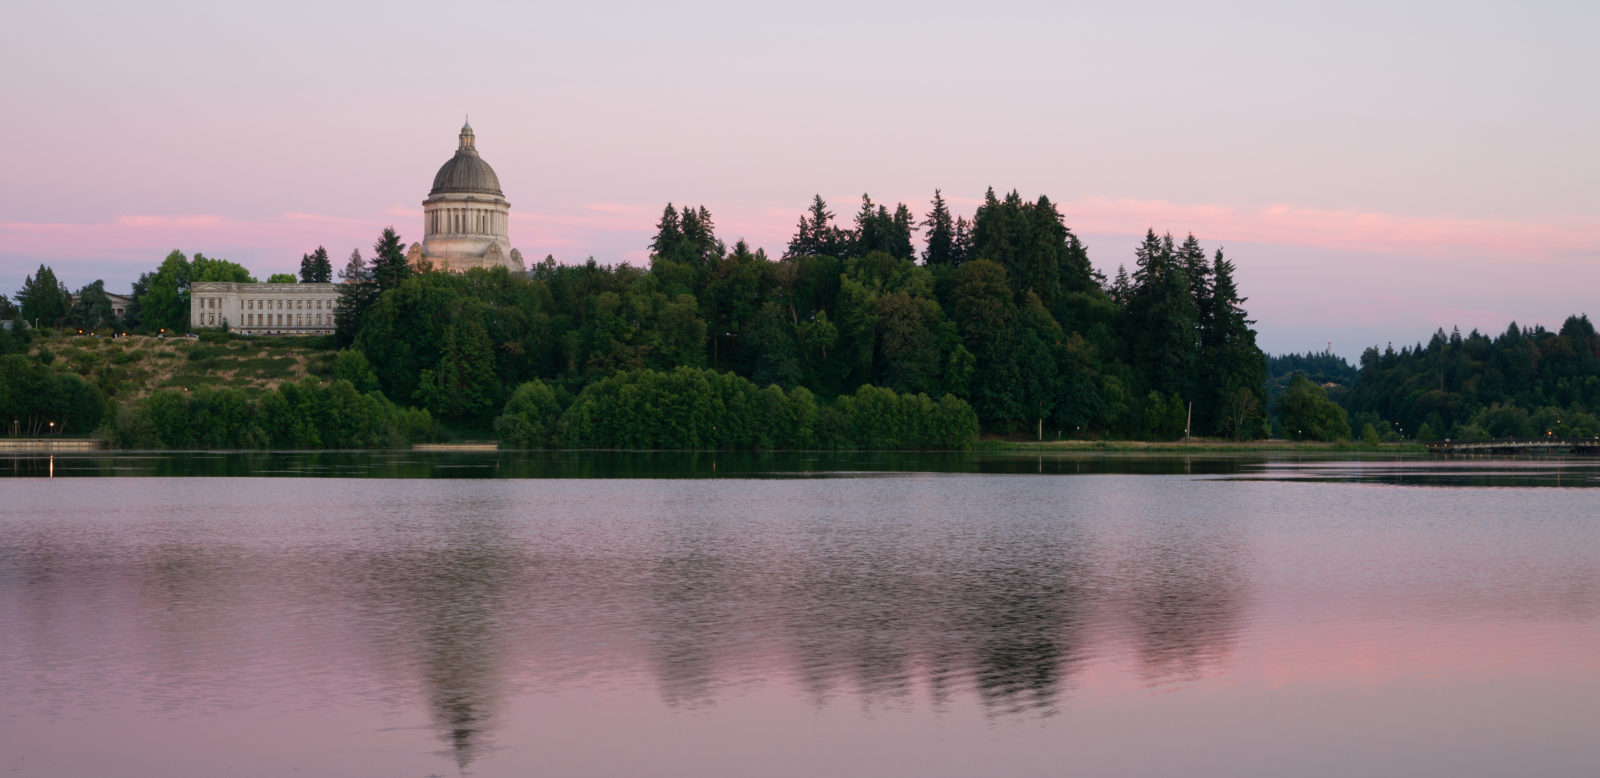 The state capital reflects in the lake of the same name at dusk in Olympia, Washington.